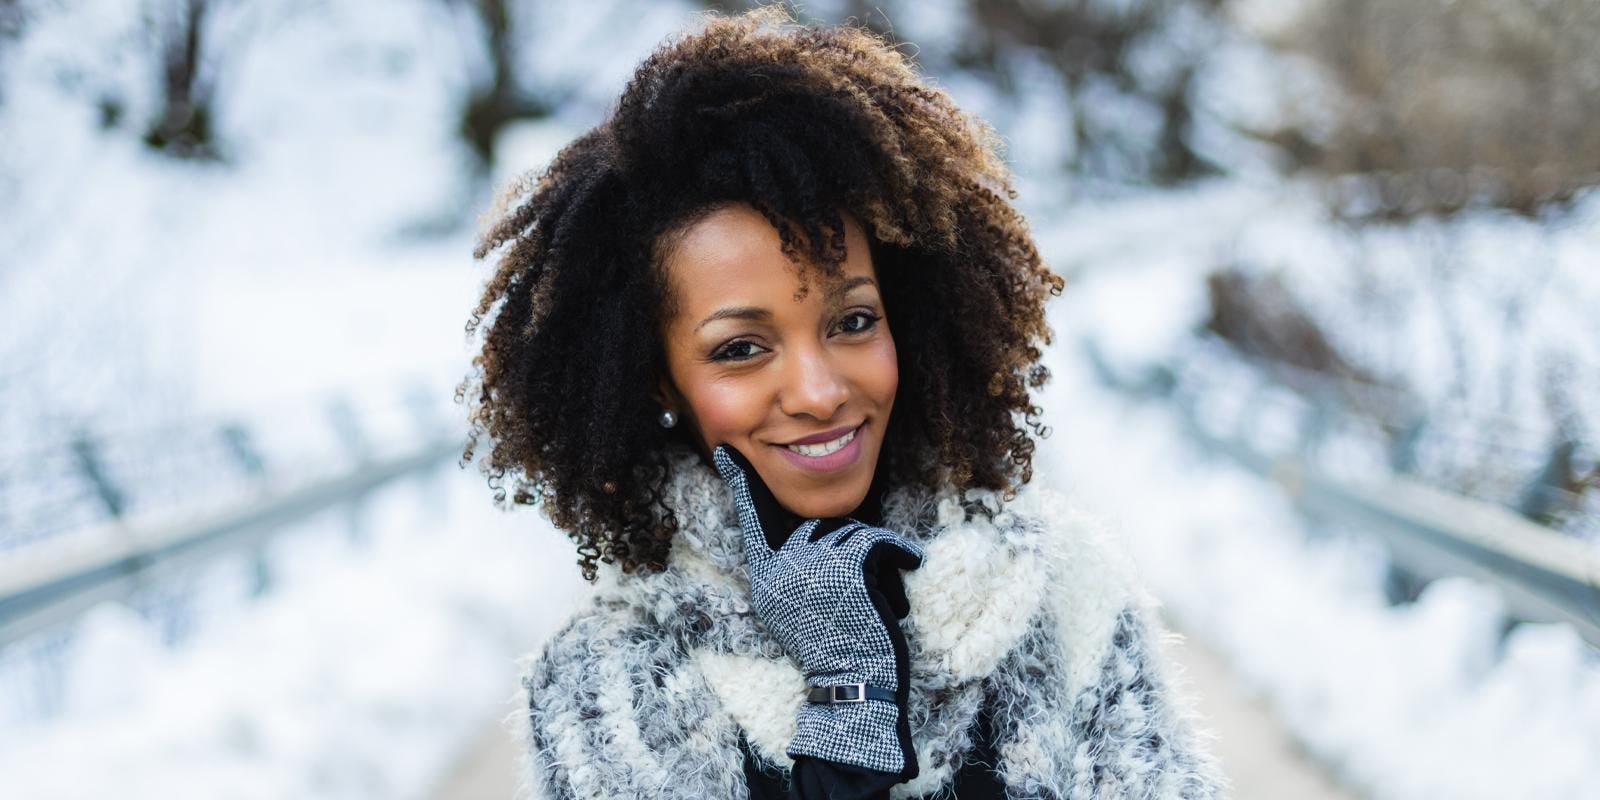 Woman with coily hair standing outside smiling during the wintertime